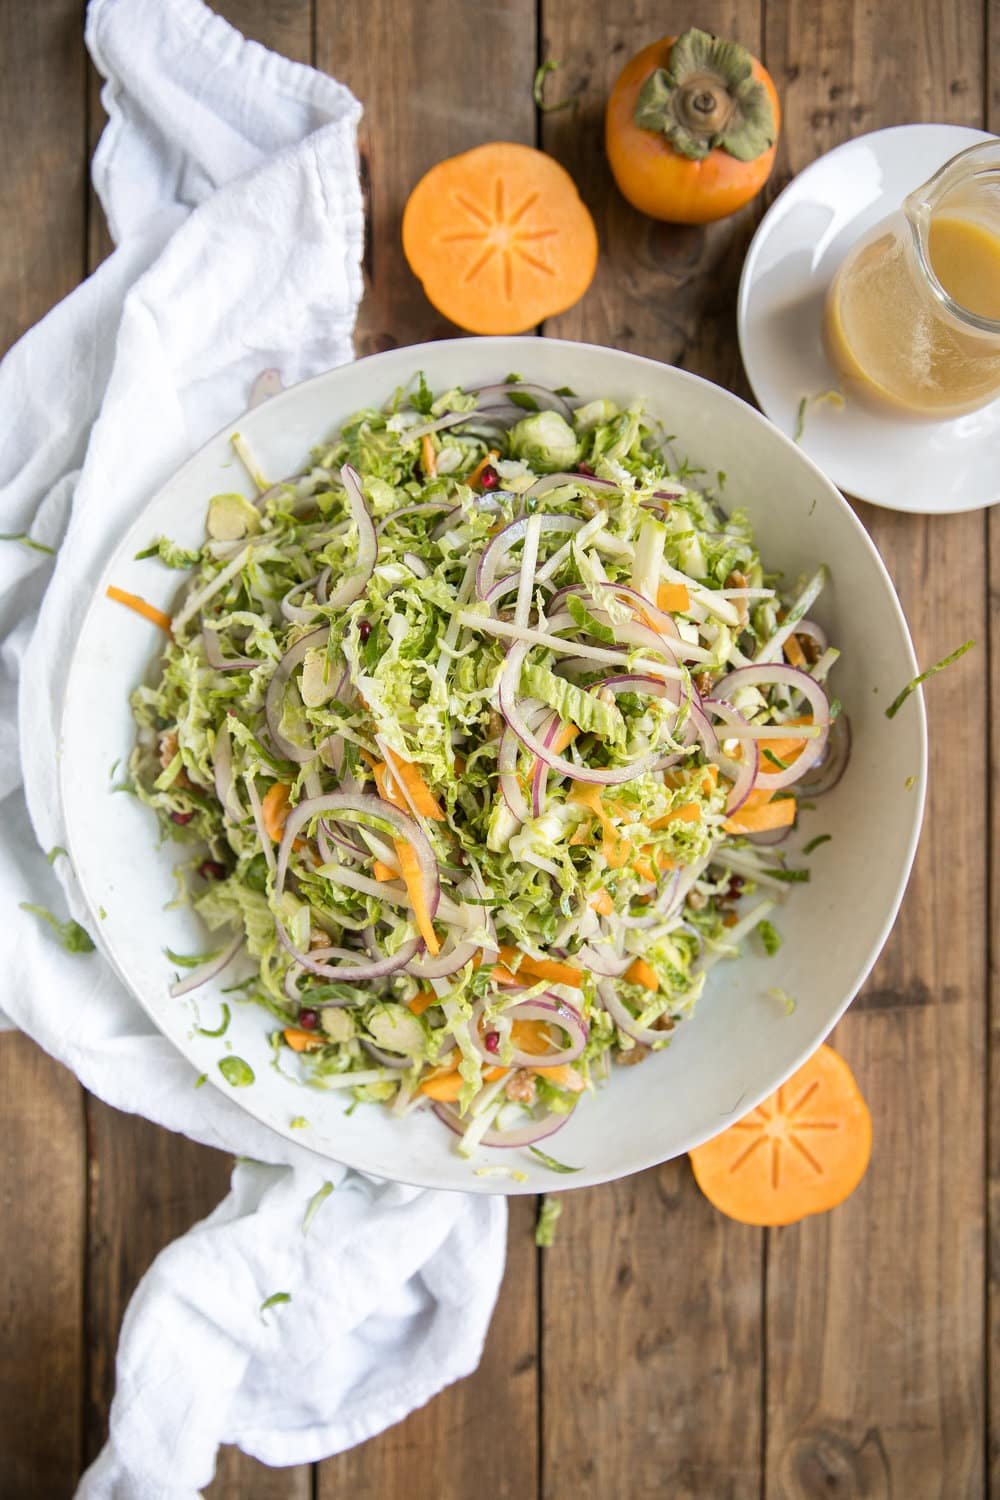 Shredded Brussels Sprout Persimmon Salad. Filled with some of falls finest like pomegranates, walnuts, pomegranates, apples, Brussels sprouts and drizzled with light dijon vinaigrette.